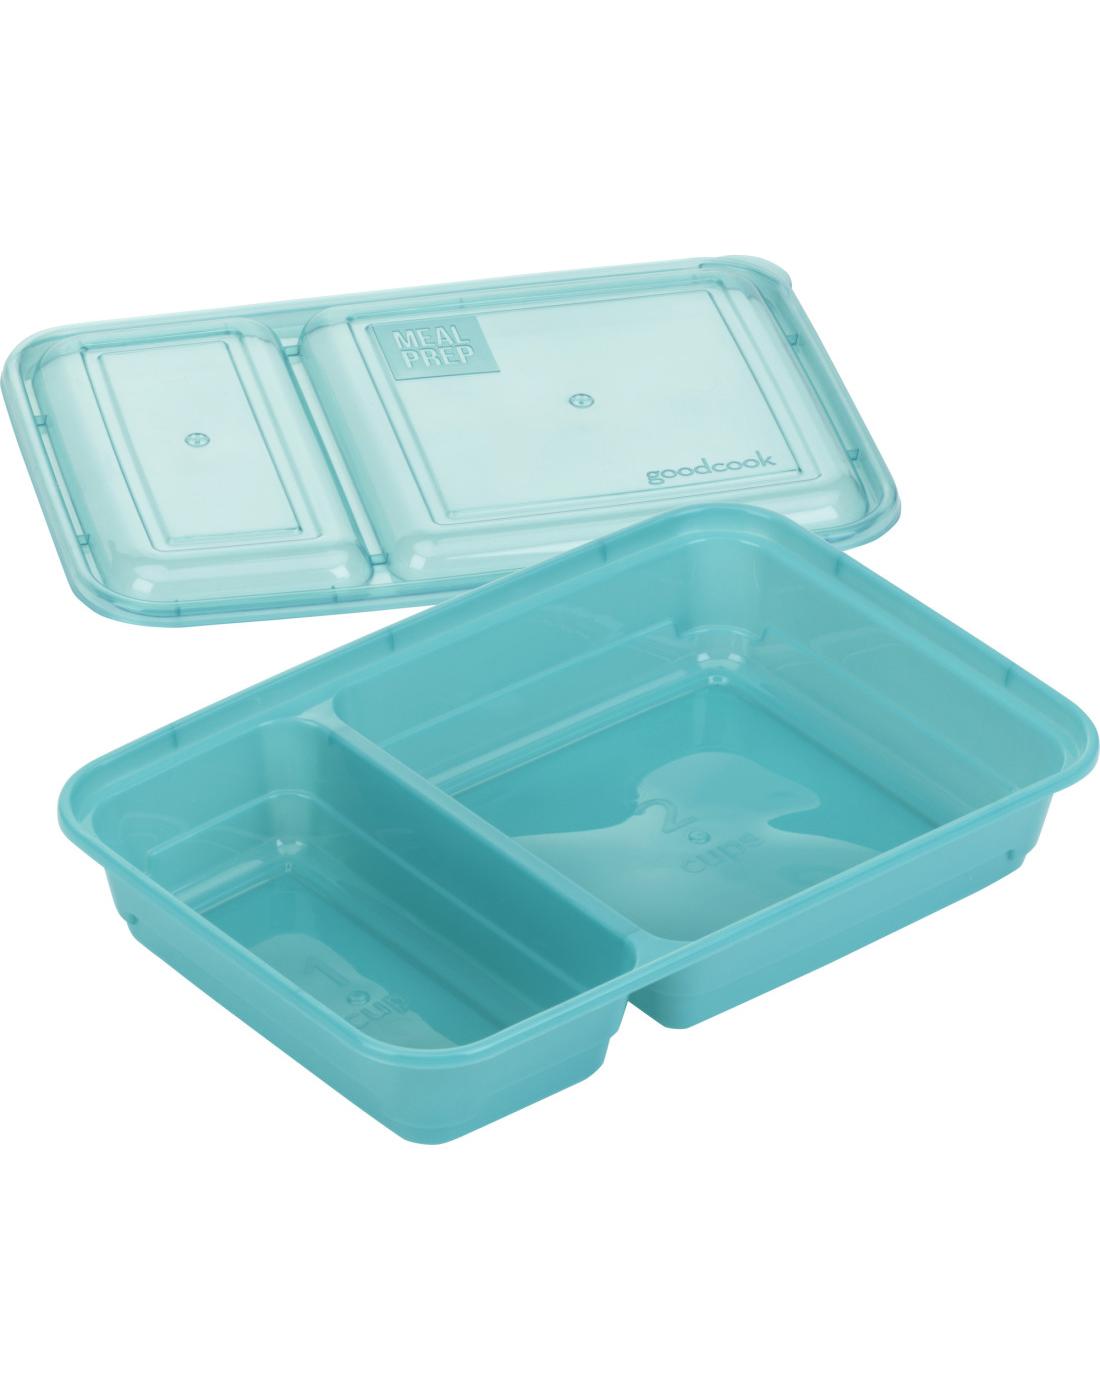 GoodCook 2 Compartment Rectangle Meal Prep Containers; image 2 of 4